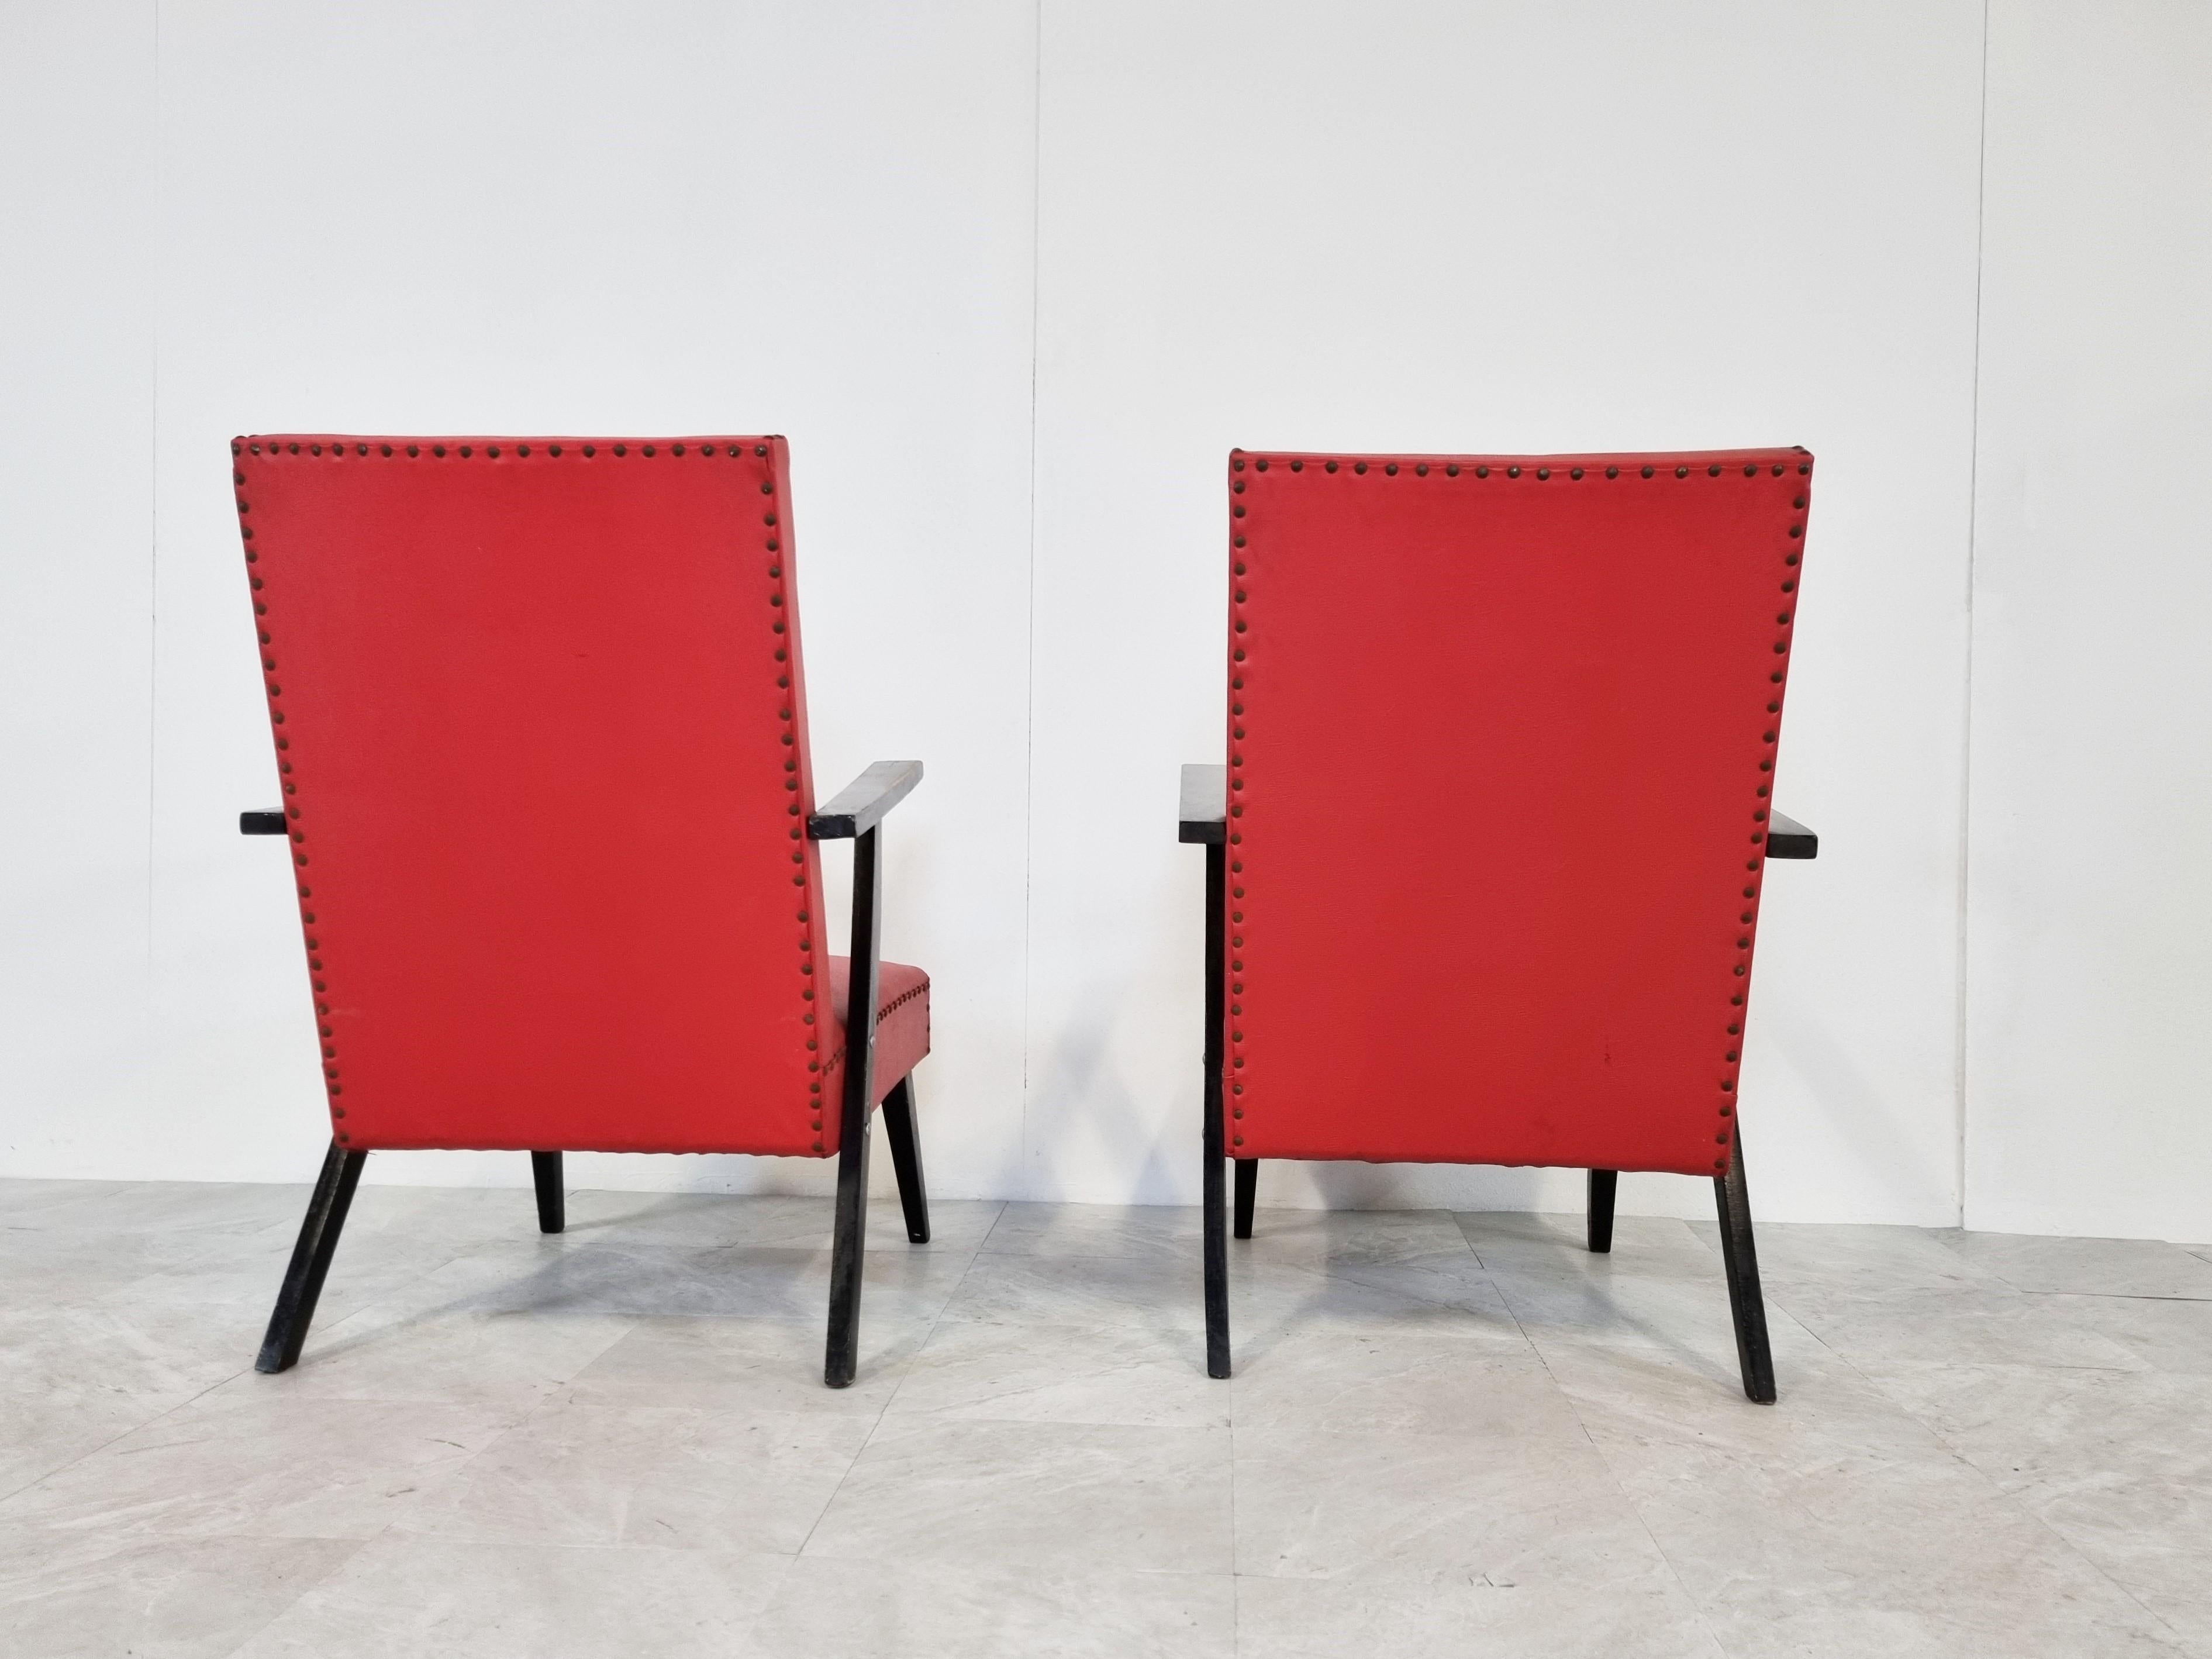 Lacquered Pair of Vintage Armchairs, 1960's, Belgium For Sale